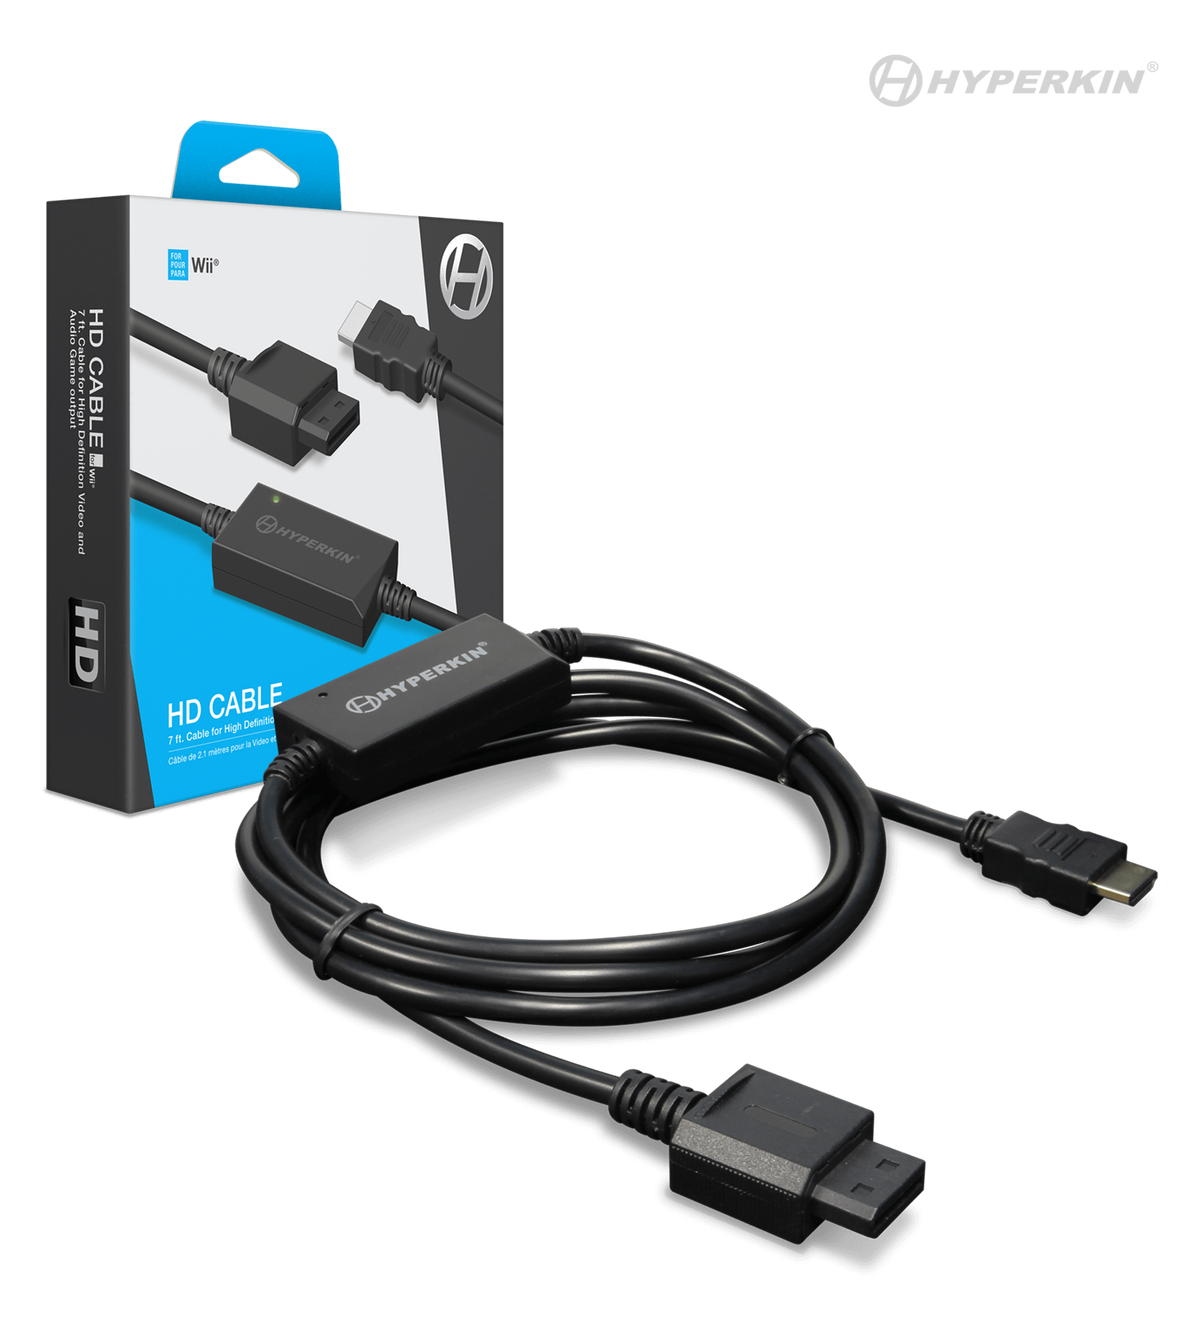 lettergreep korting expositie Hyperkin Wii HD Cable – Limited Run Games